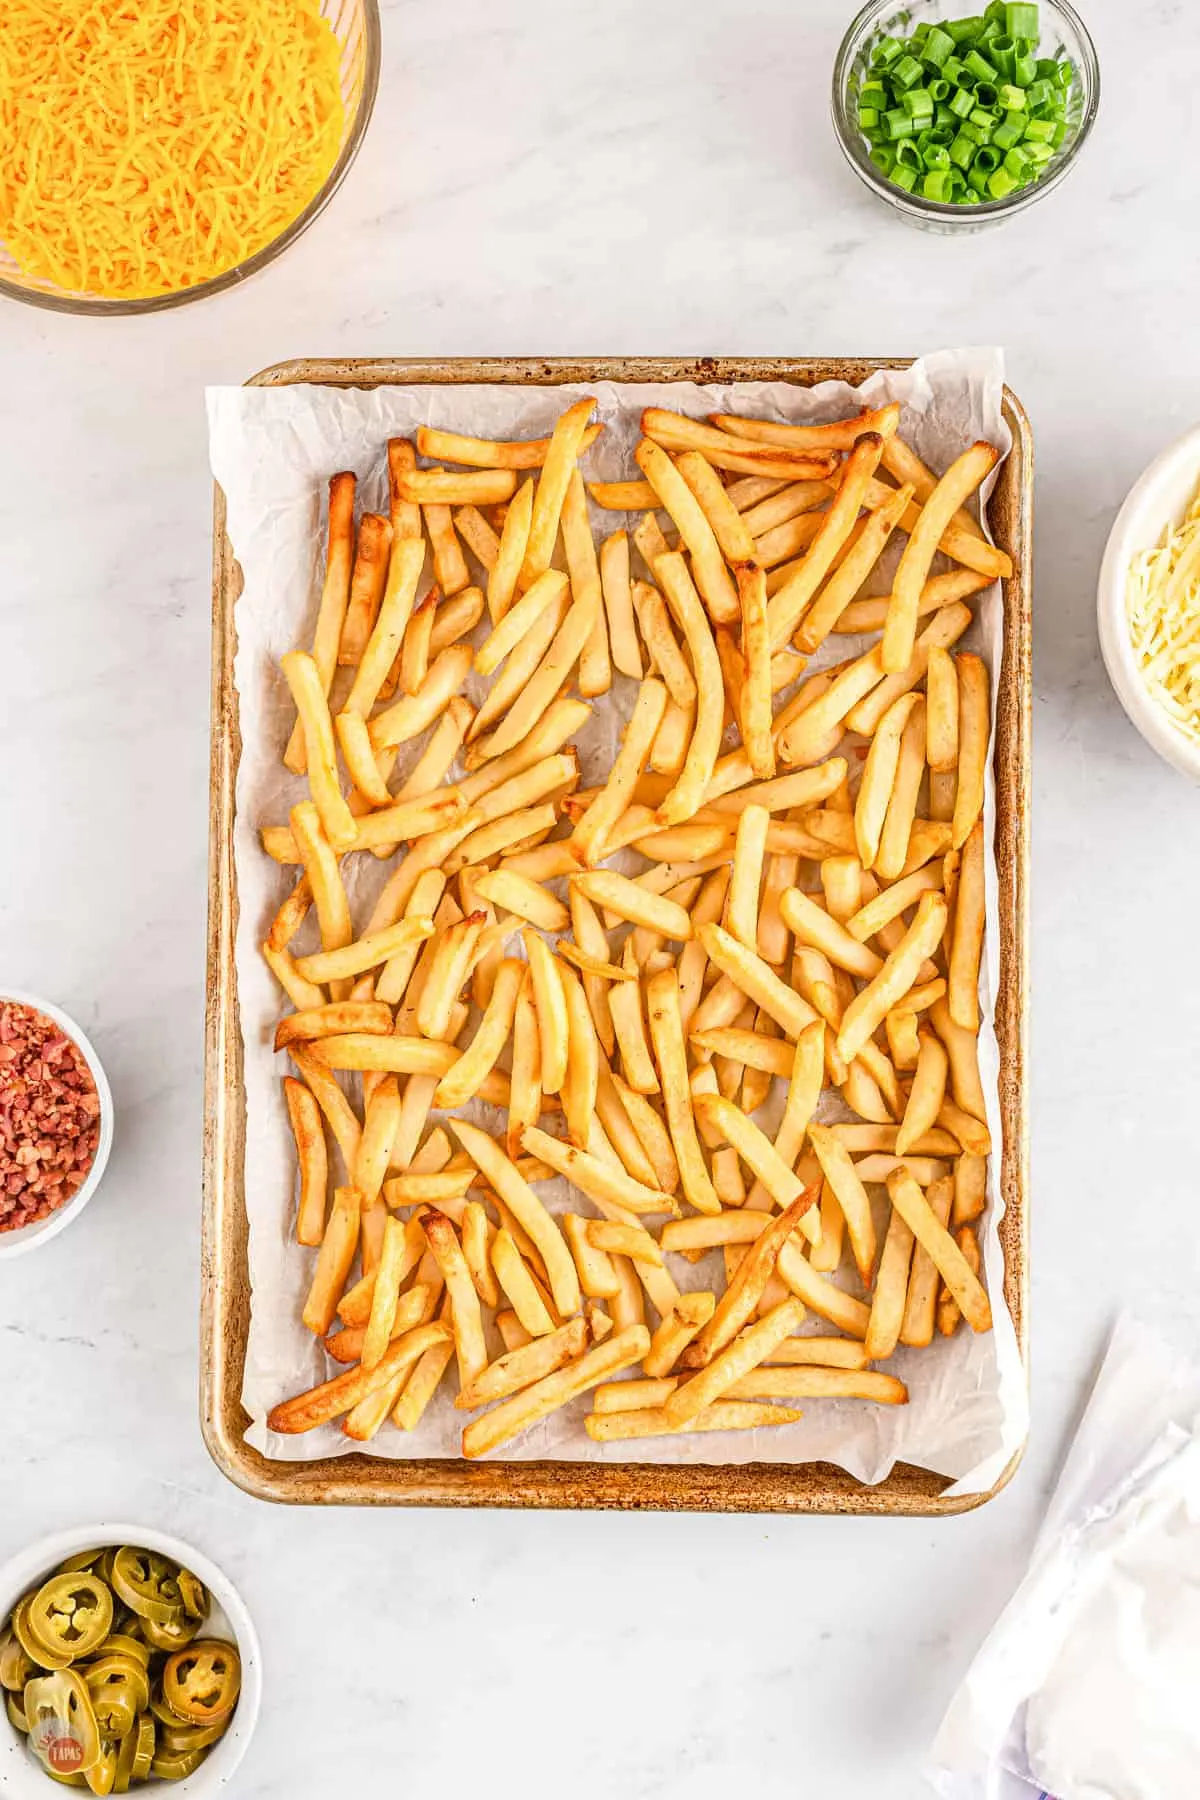 A baking tray lined with parchment paper filled with baked french fries.